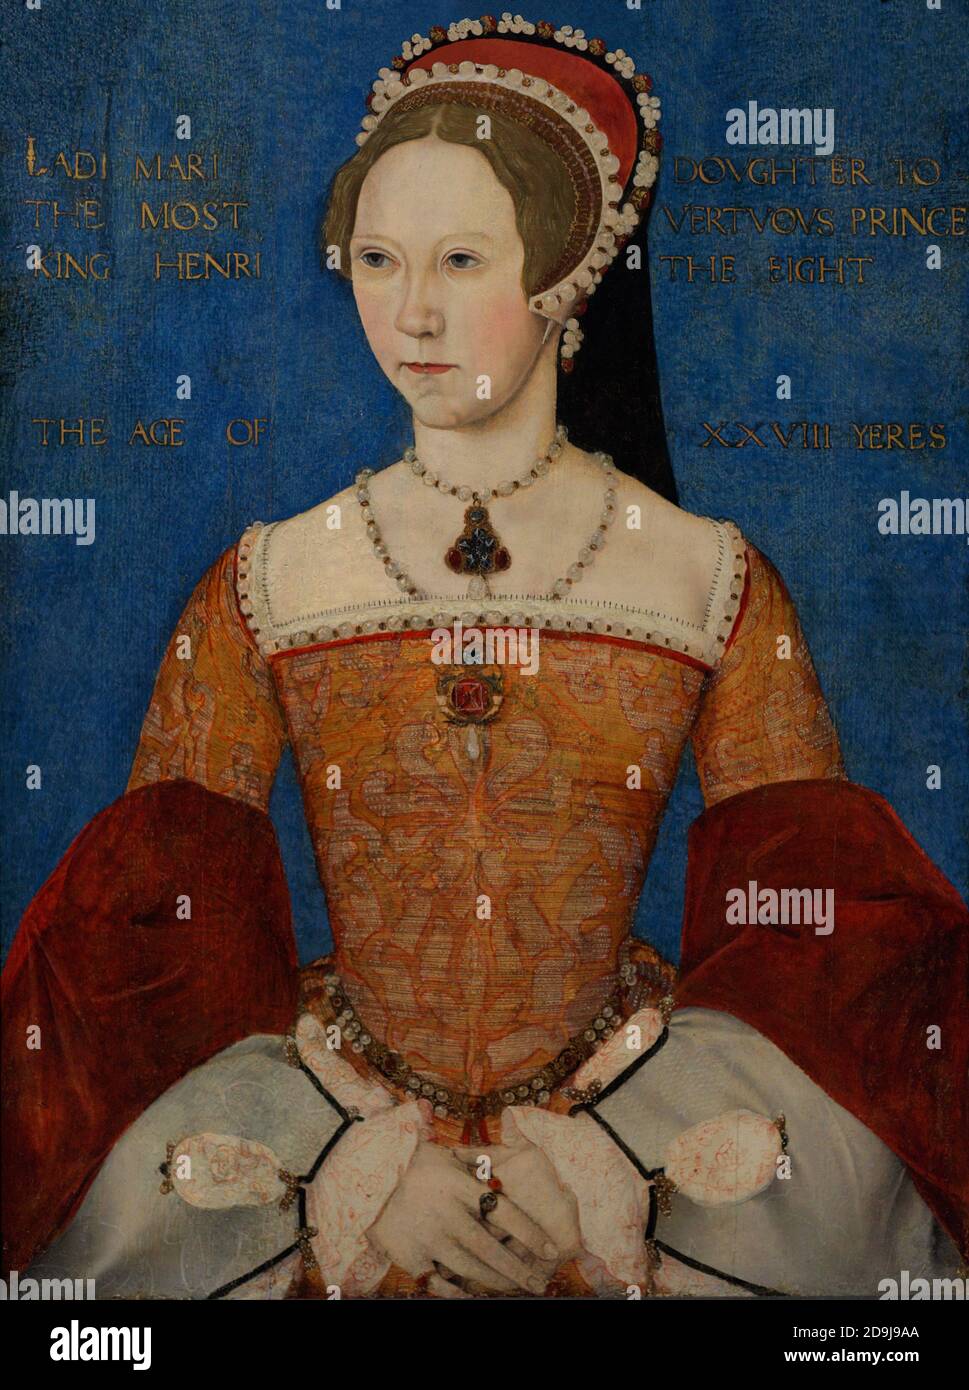 Queen Mary I of England (1516-1558). England's first female monarch. Portrait by Master John. Oil on panel, 1544. National Portrait Gallery. London, England, United Kingdom. Stock Photo